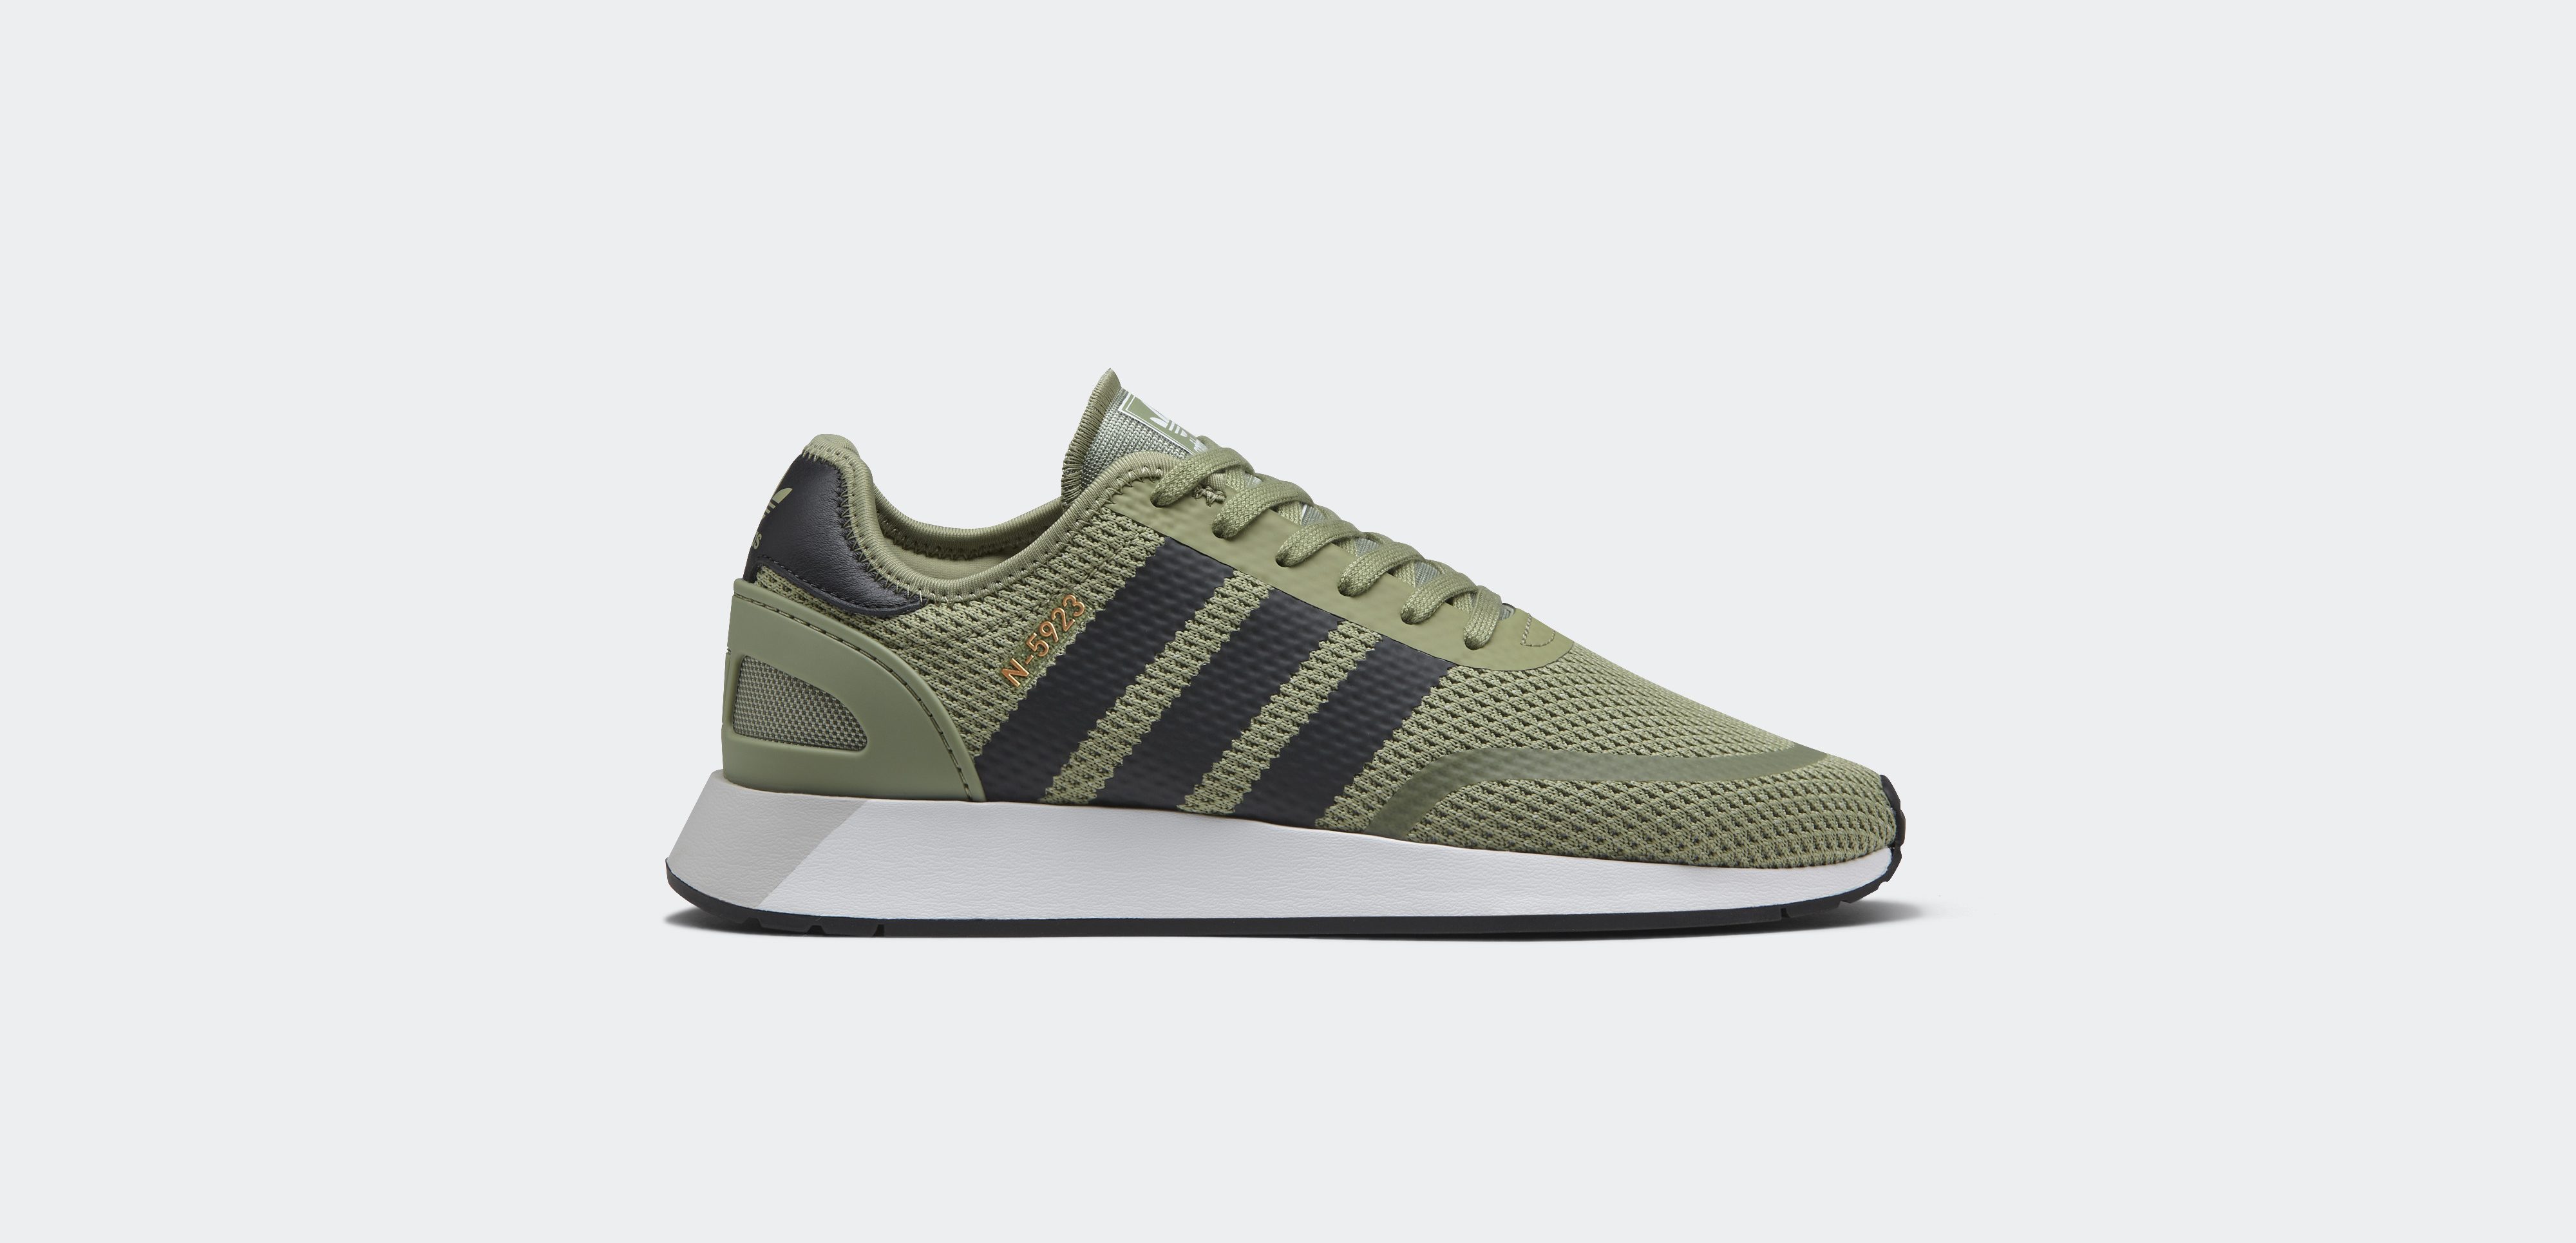 The adidas I-5923 Sheds its Boost and 